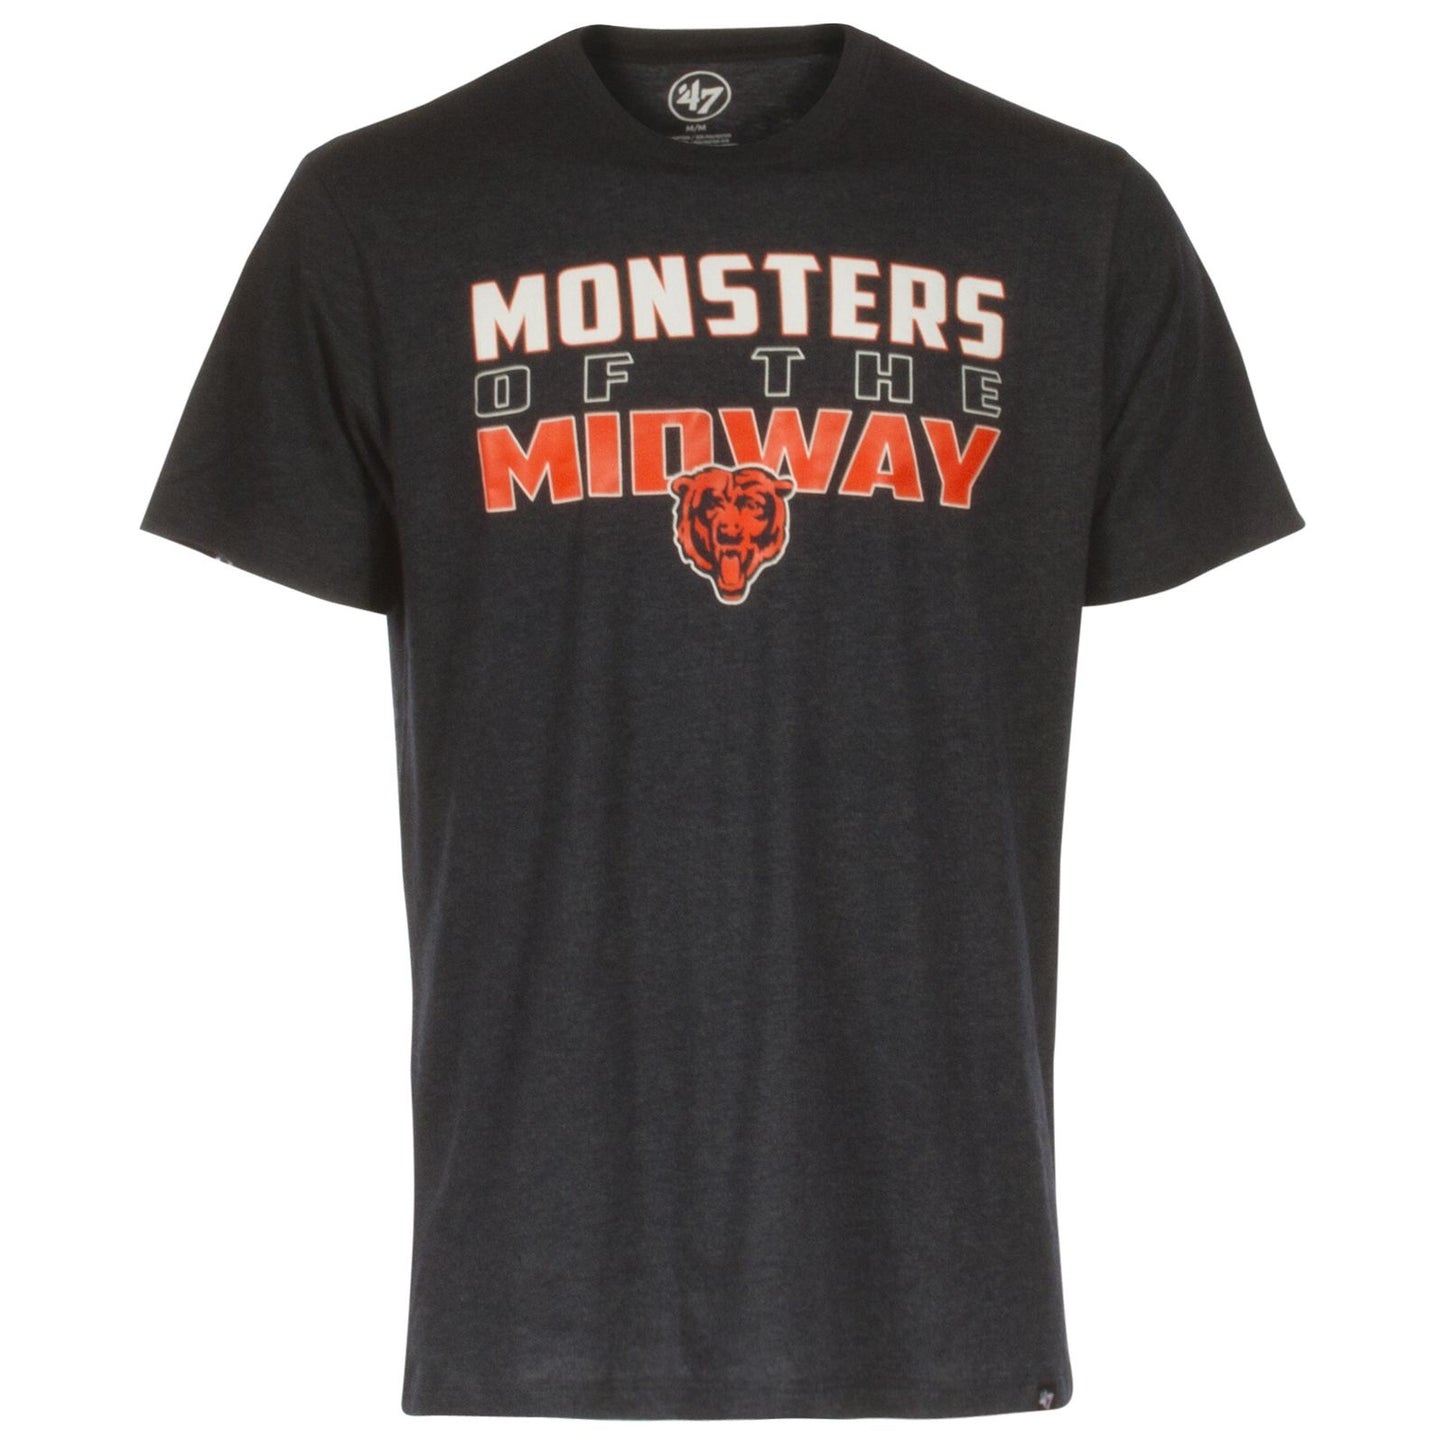 Men's Chicago Bears NFL "Monsters of the Midway"Navy Regional Club Tee By ’47 Brand